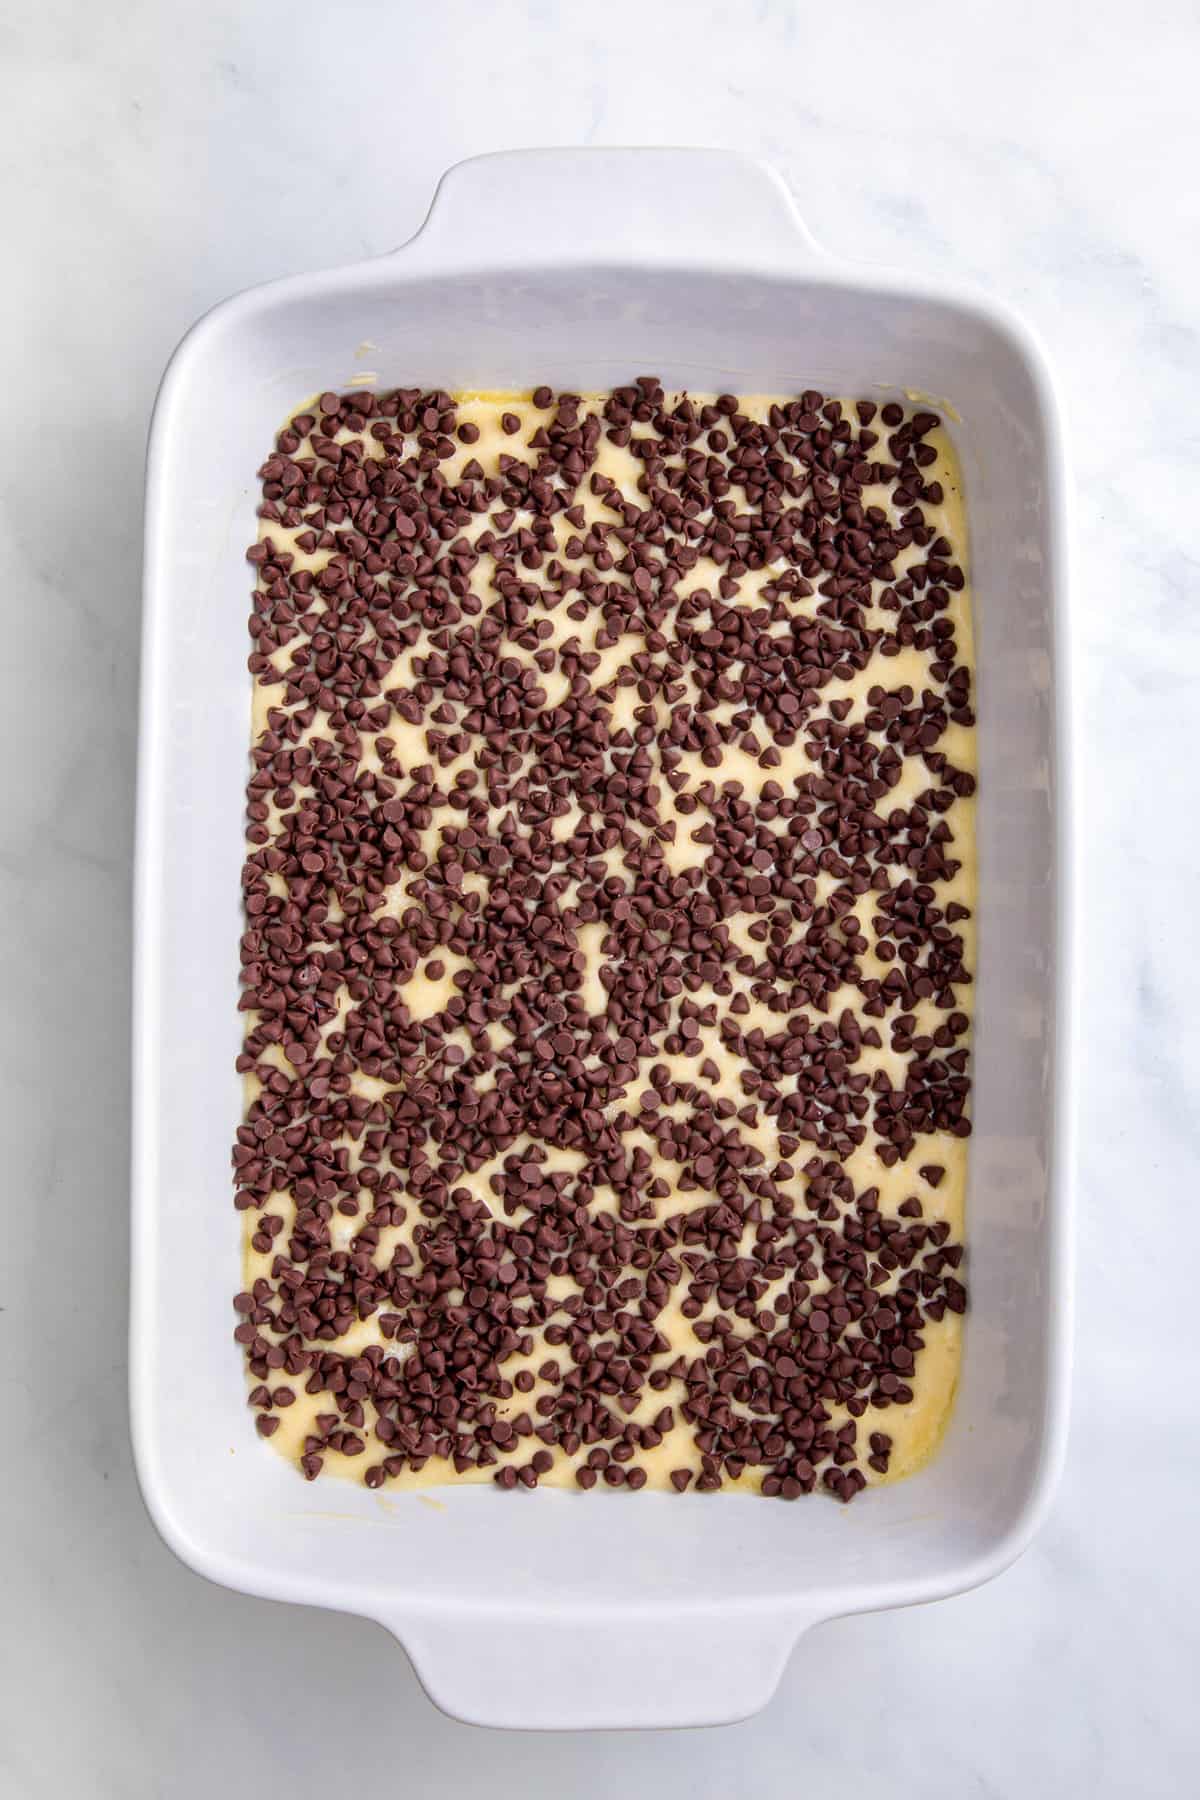 cake batter topped with chocolate chips in a 9x13 baking dish